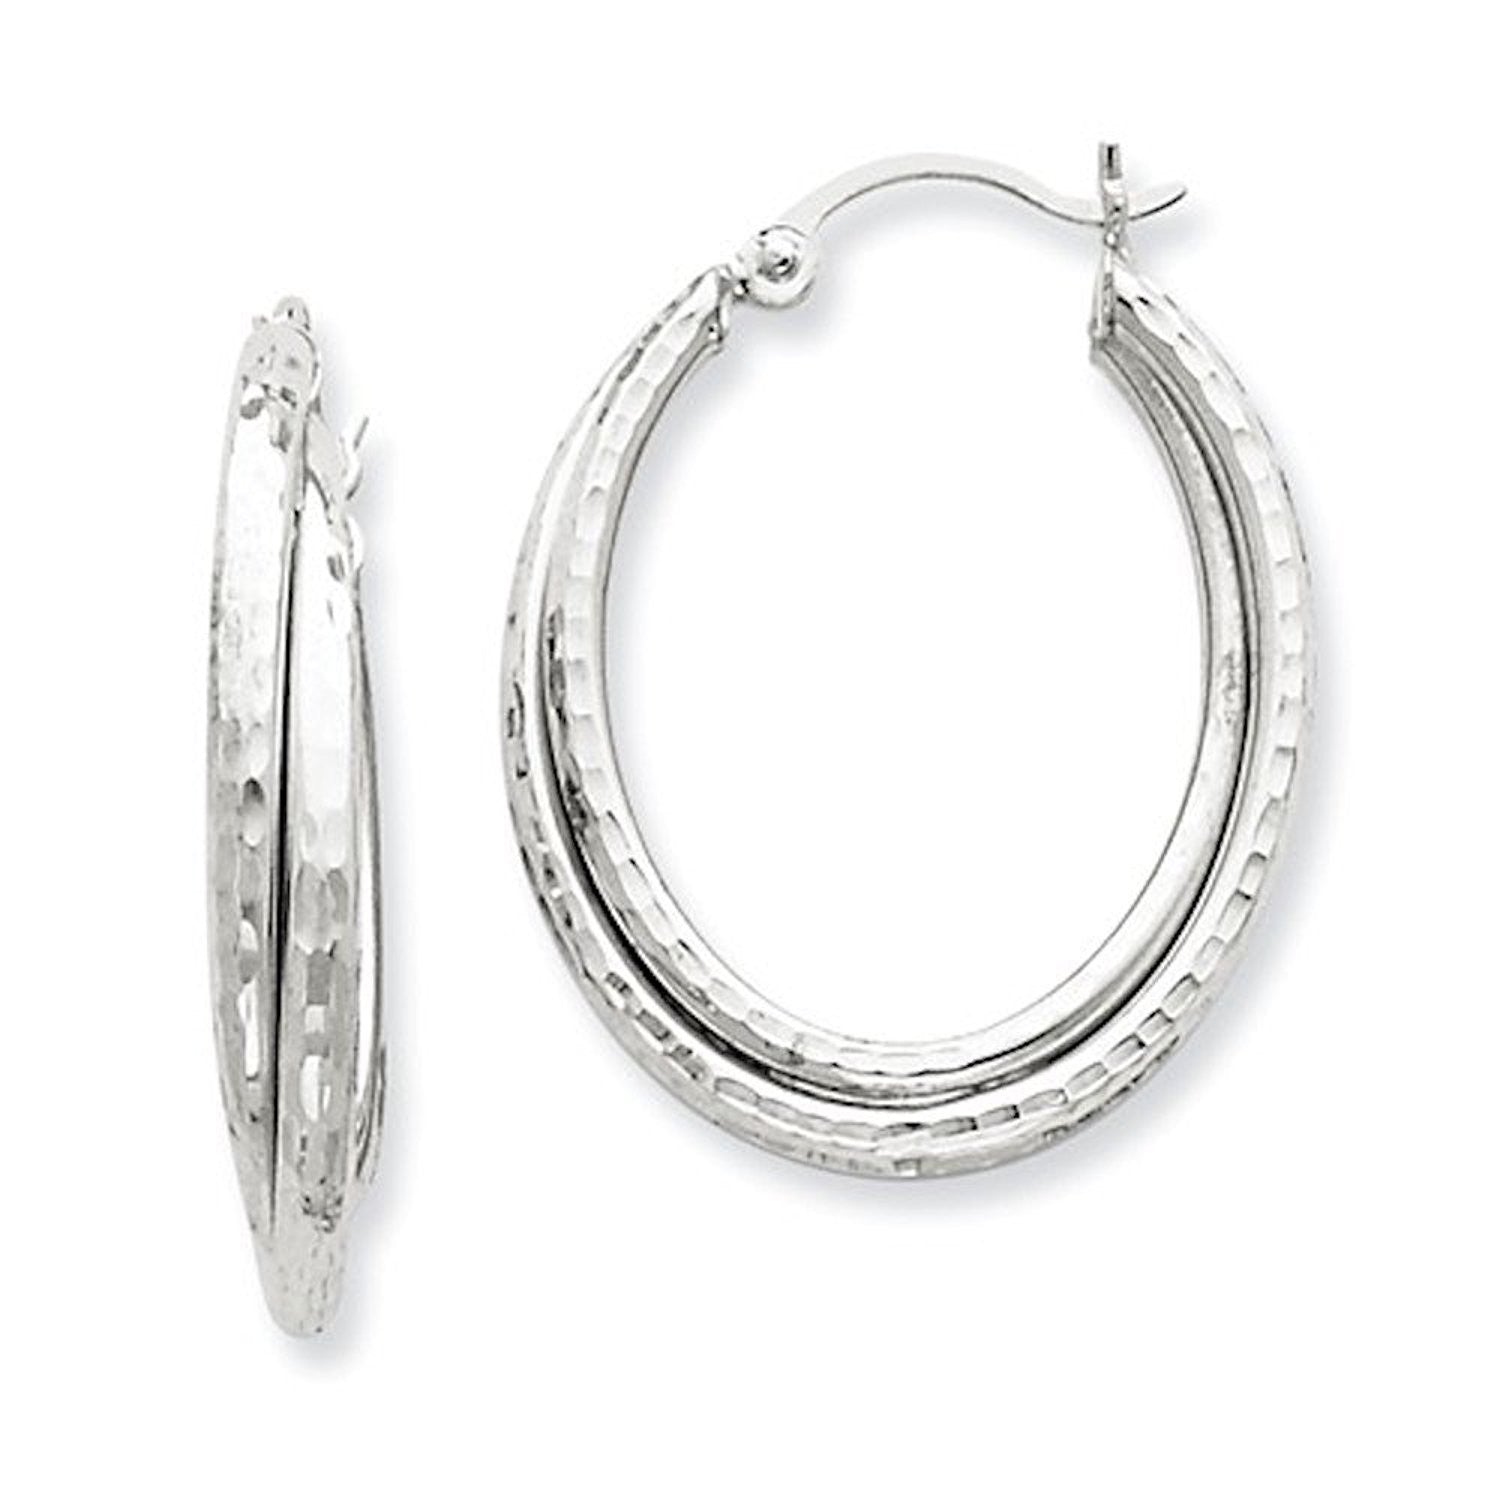 14k White Gold Large Oval Hammered Style Hoop Earrings